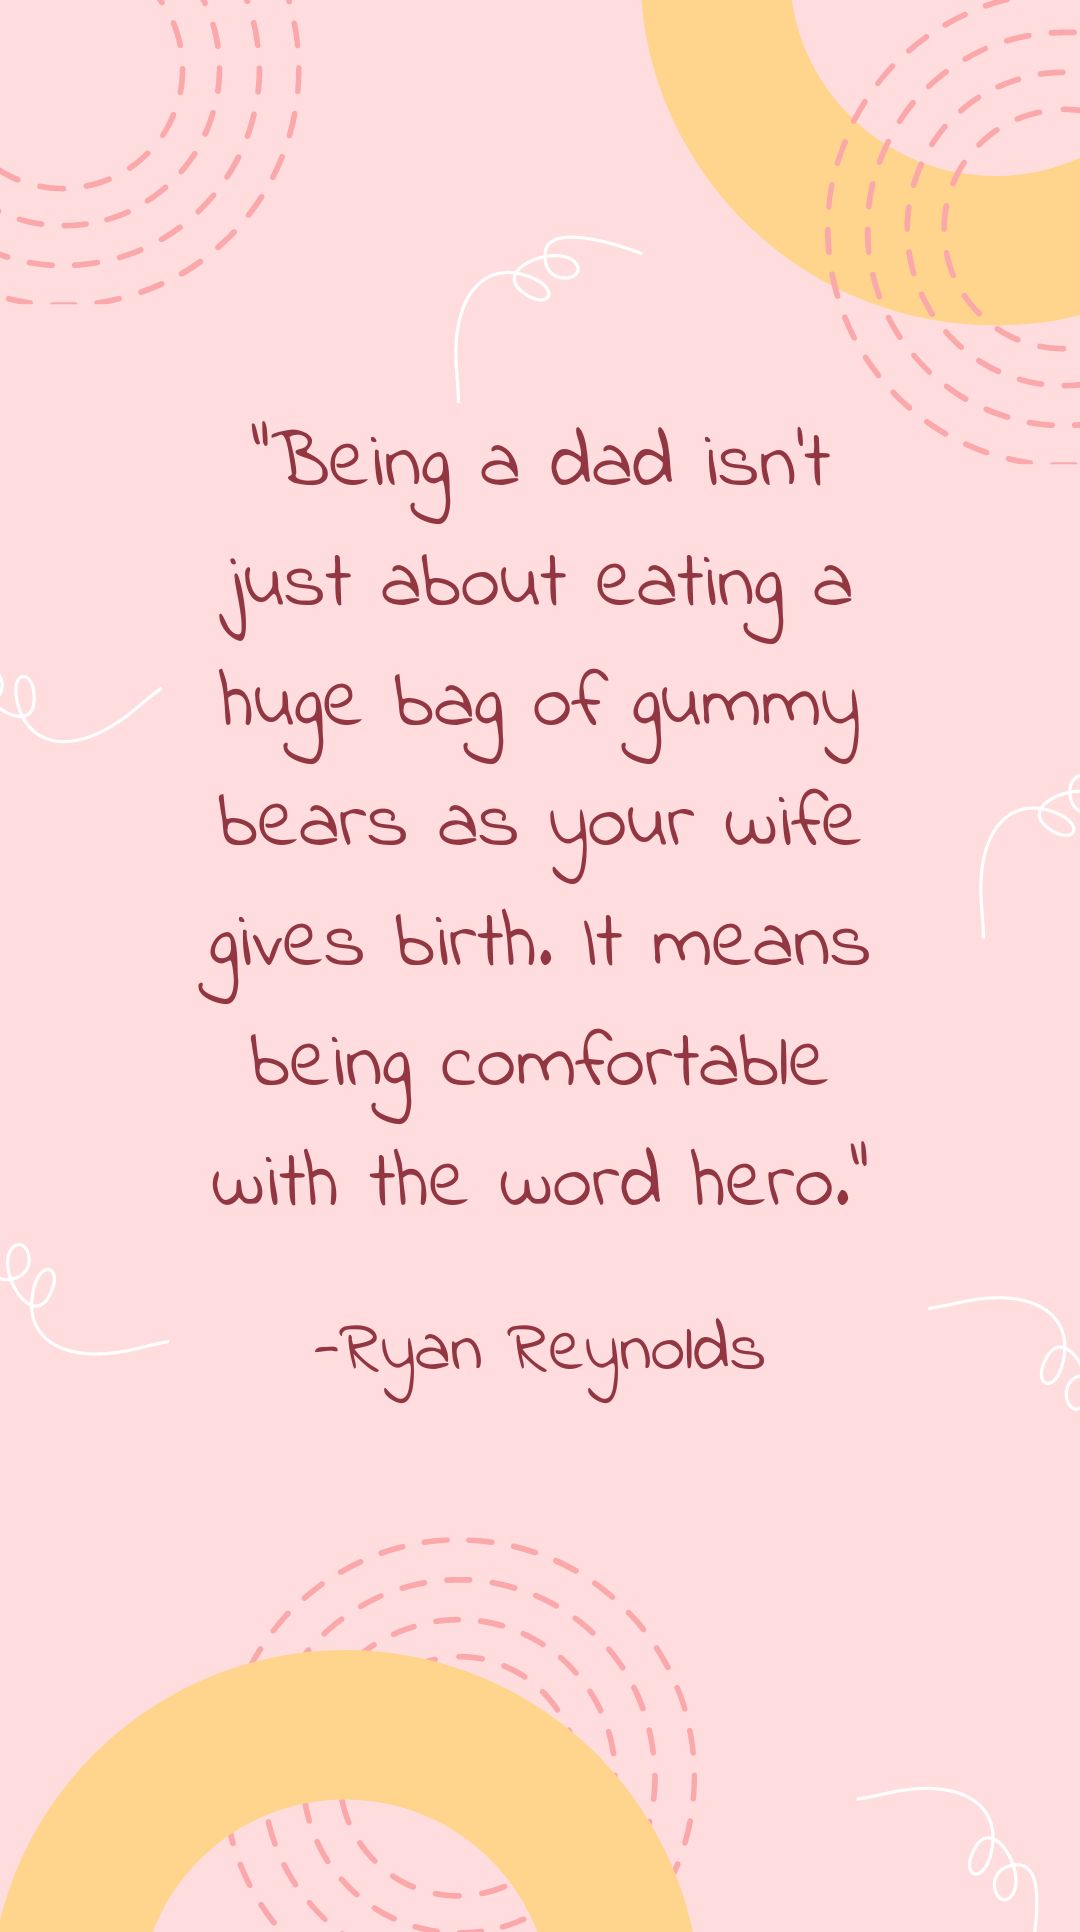 Ryan Reynolds - Being a dad isn’t just about eating a huge bag of gummy bears as your wife gives birth. It means being comfortable with the word hero.